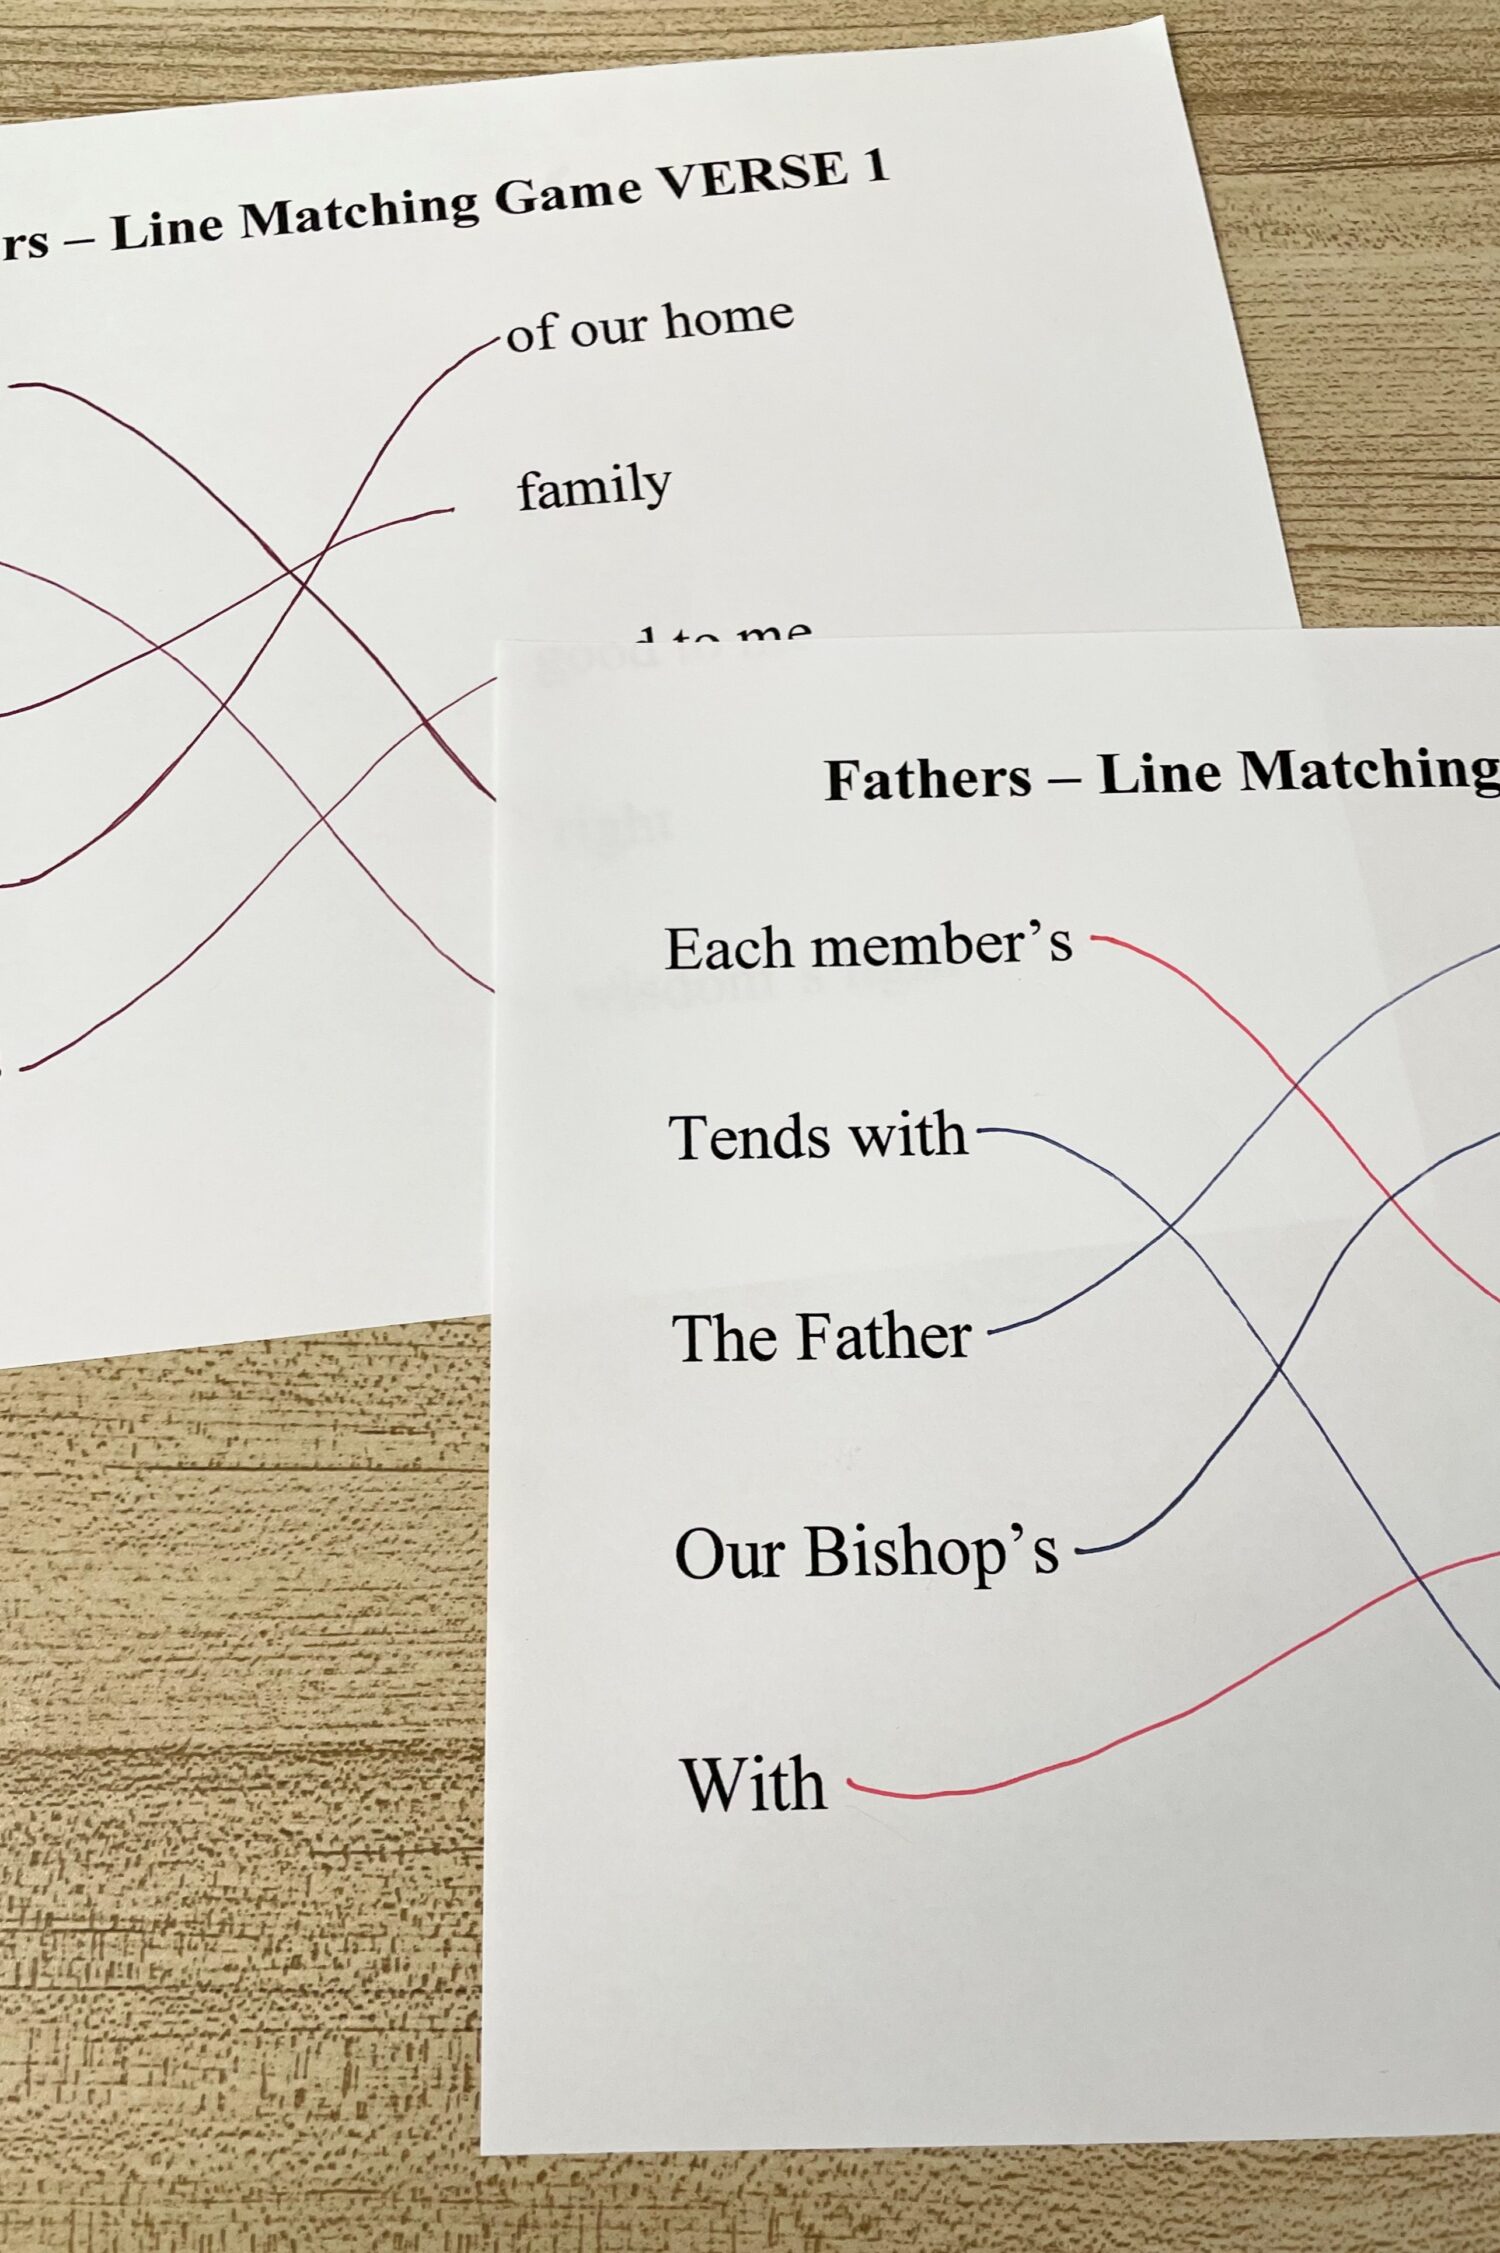 Fathers Line Matching Game Easy singing time ideas for Primary Music Leaders IMG 6611 1